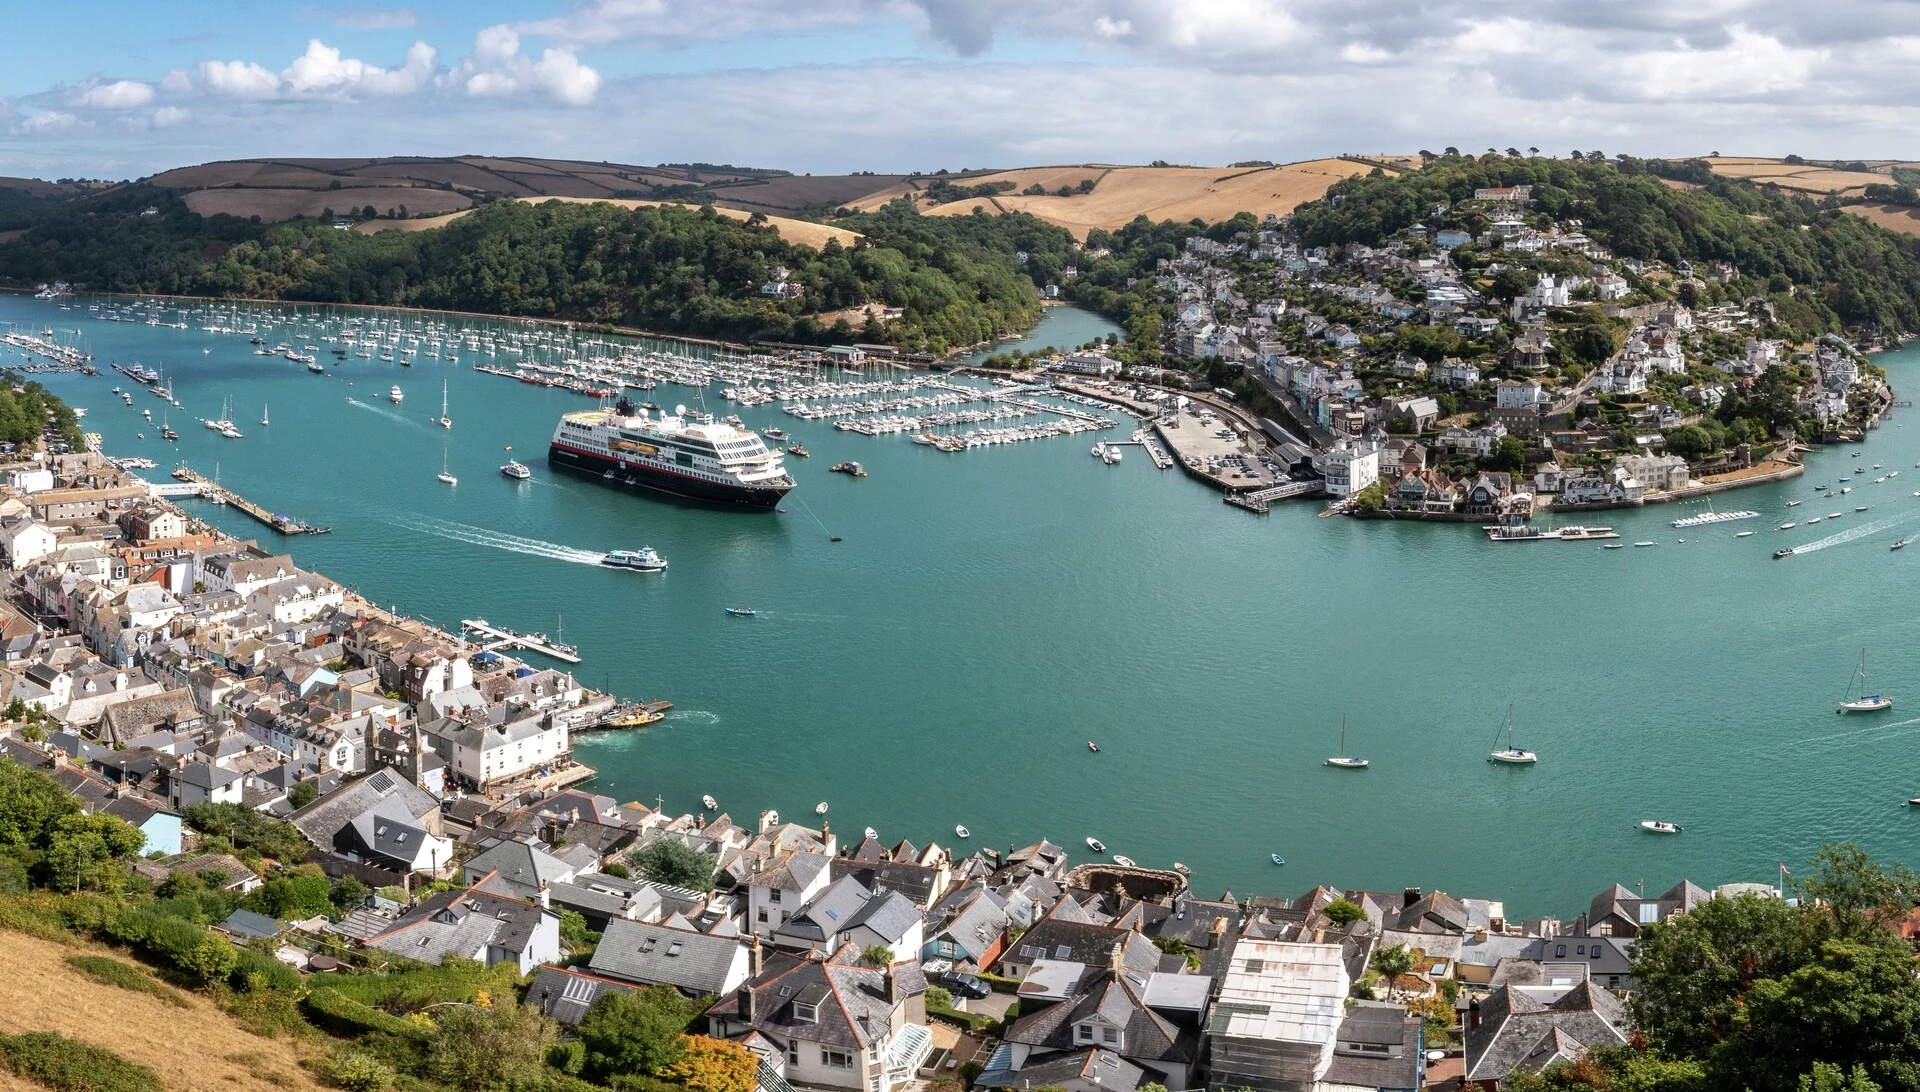 MS Maud in the harbour of Dartmouth, British Isles. Photo: Tommy Simonsen